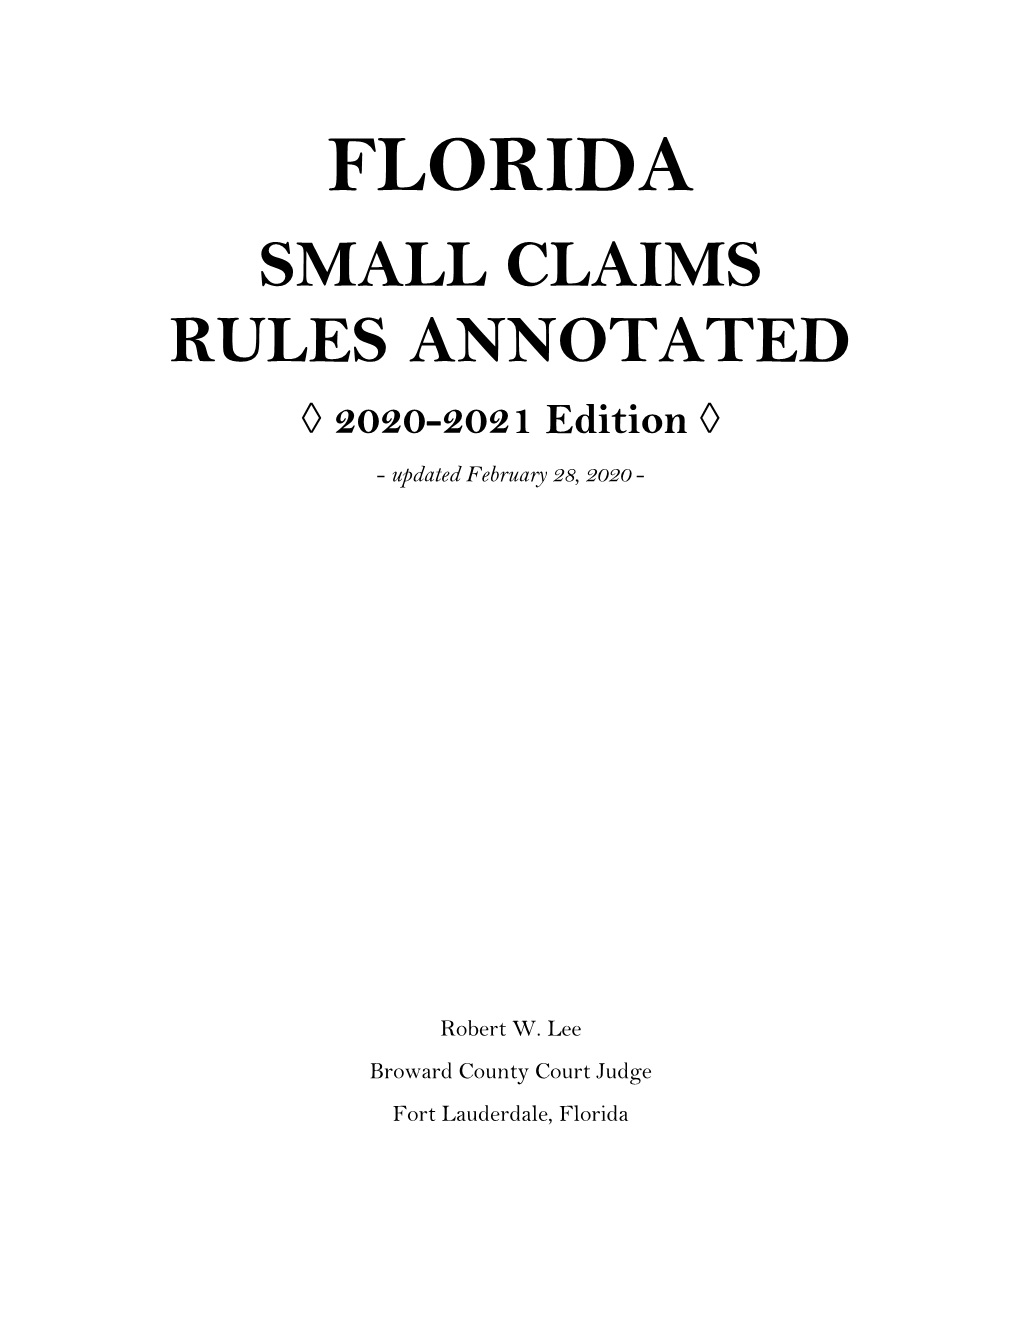 Florida Small Claims Rules Annotated 2020